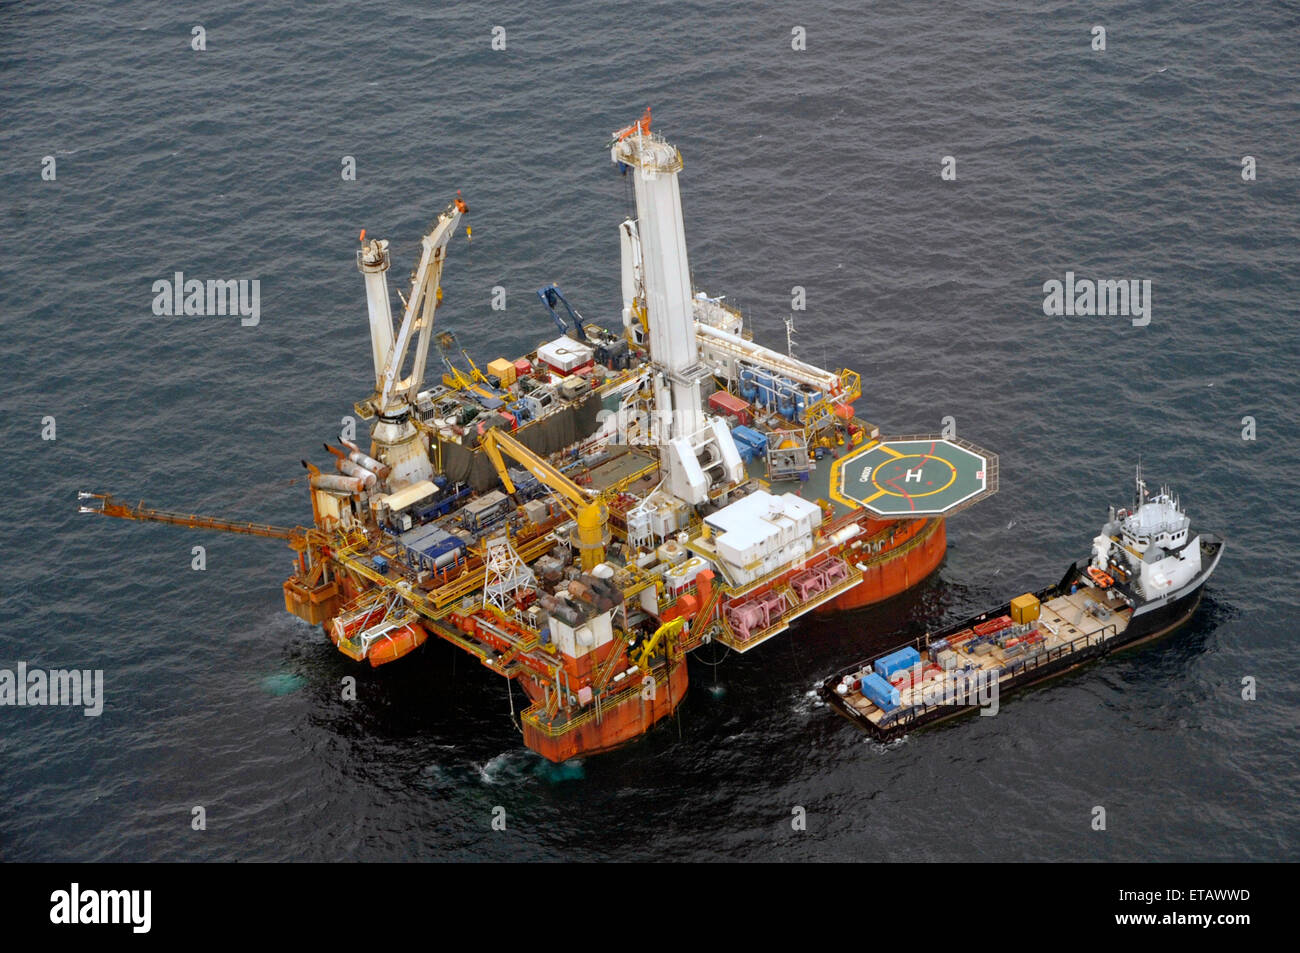 The mobile offshore drilling unit Q-4000 in the process of drilling a relief well prepares for Tropical Storm Bonnie at the BP Deepwater Horizon oil spill disaster site July 23, 2010 in the Gulf of Mexico. Stock Photo